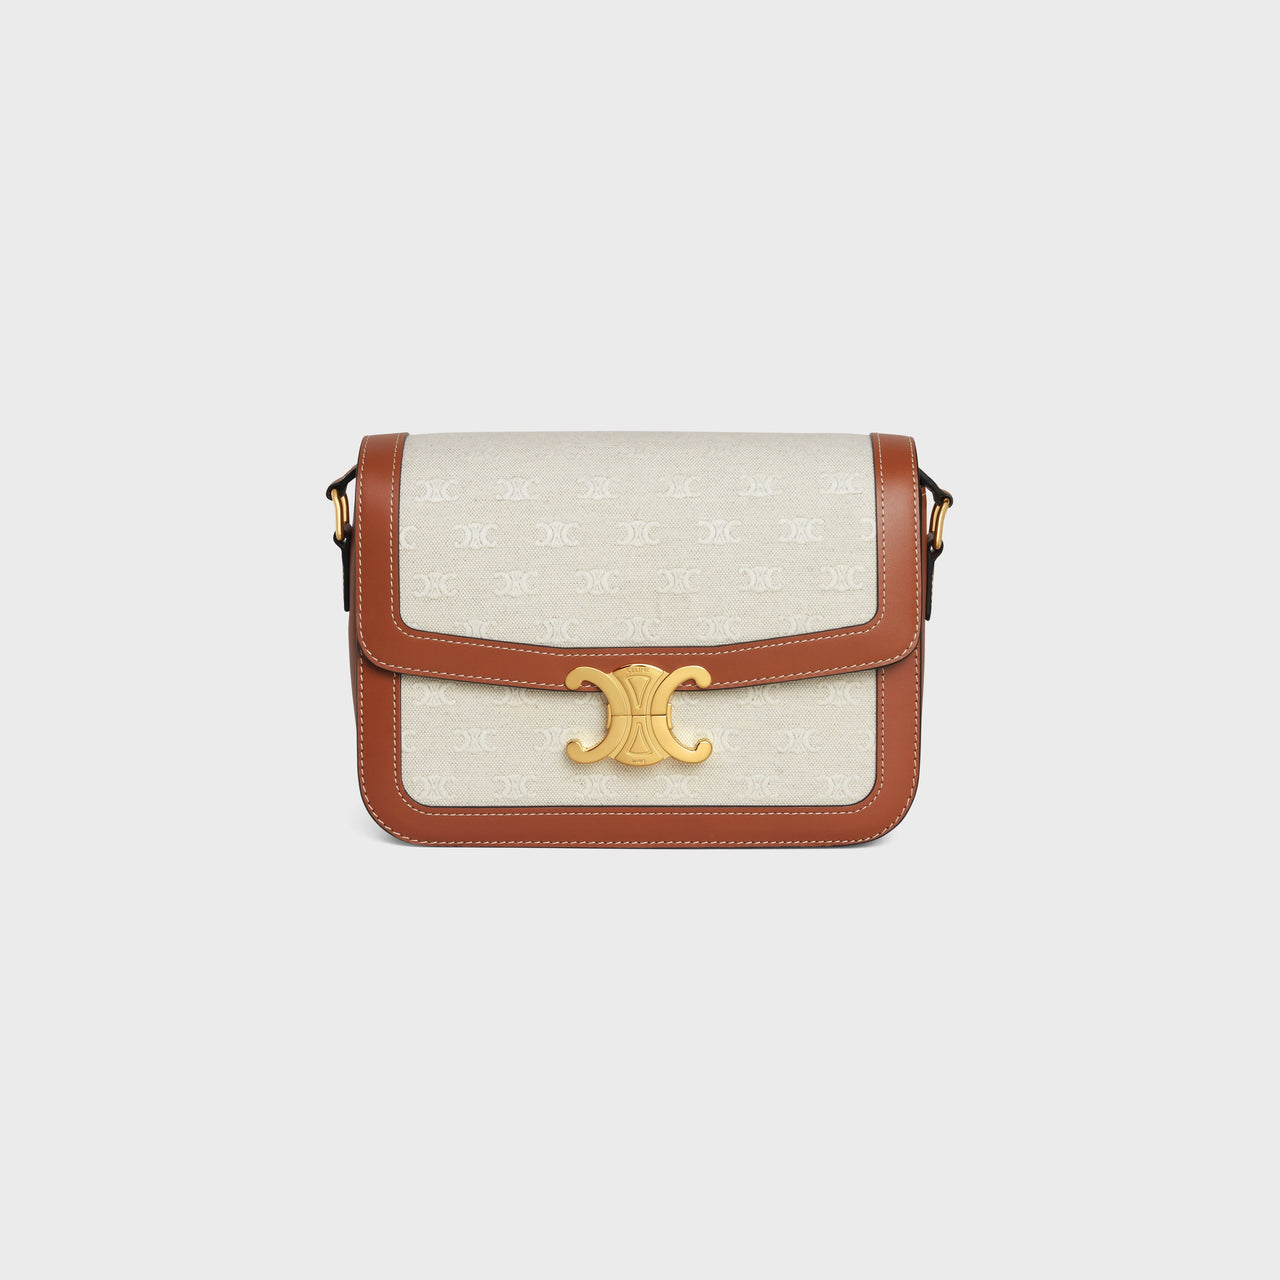 Celine Classique Triomphe Bag in Textile with Triomphe  All-over & Calfskin  (Natural/Tan)